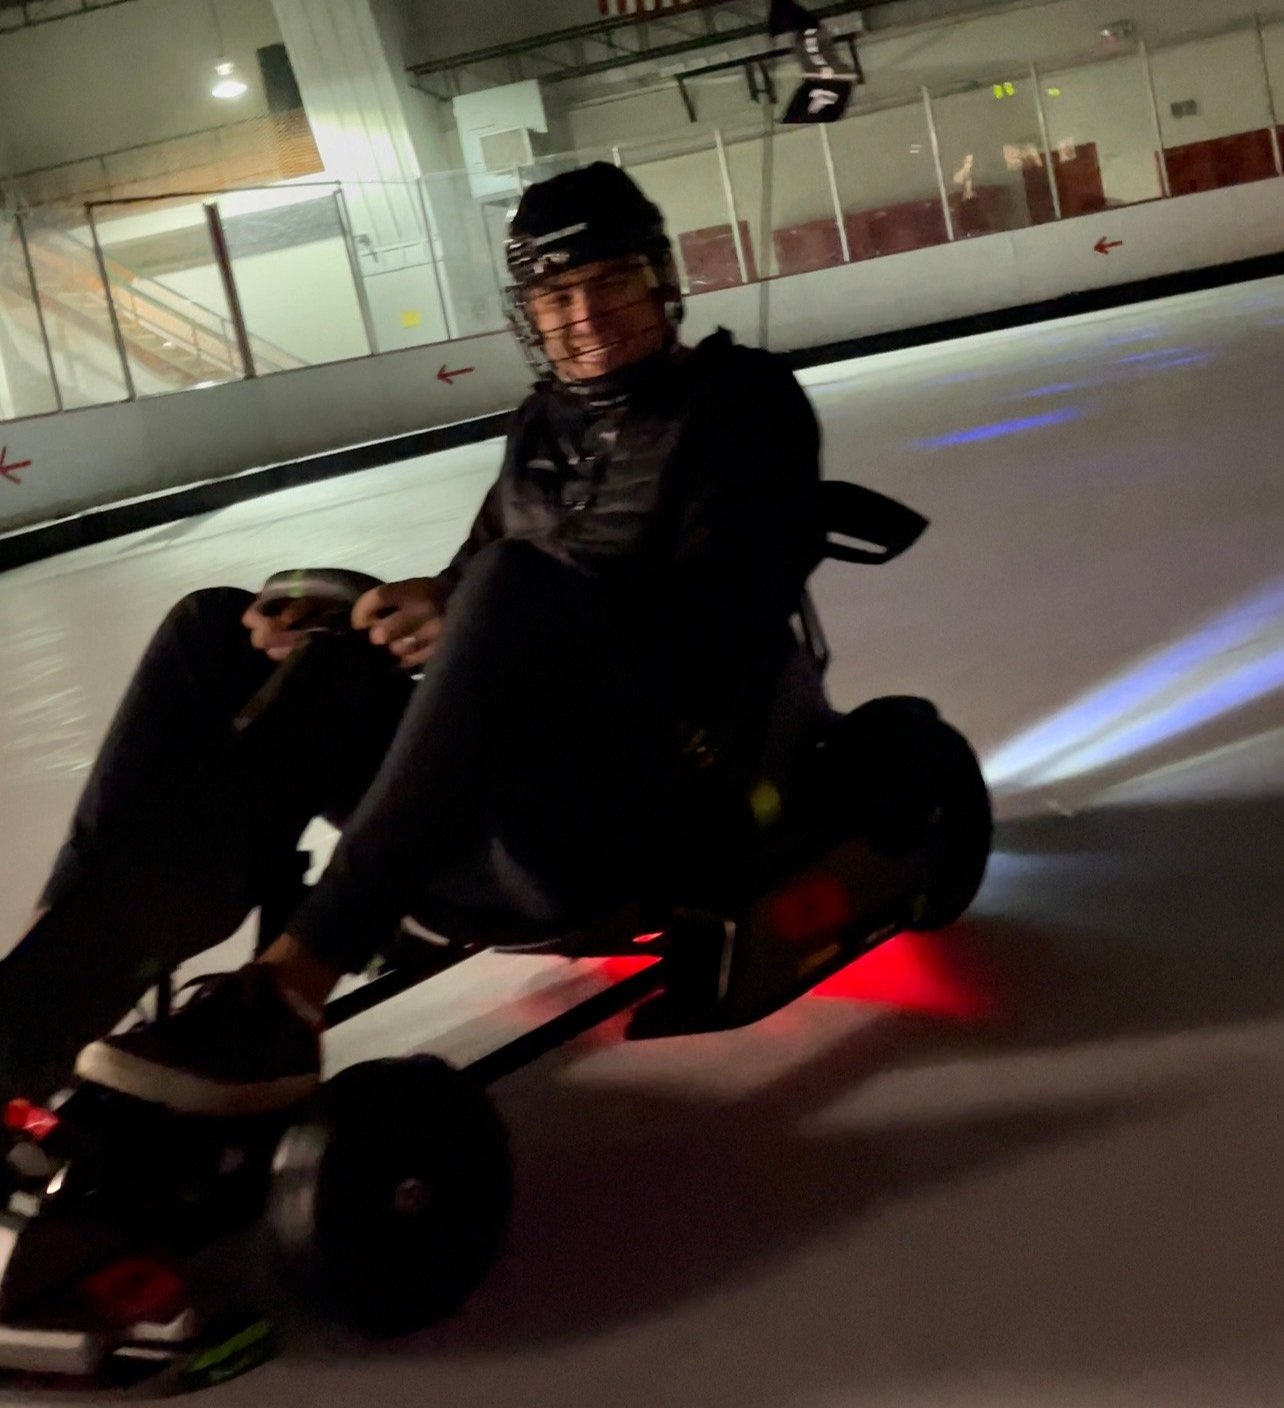 Mario ice karting rink is coming to Denver in January